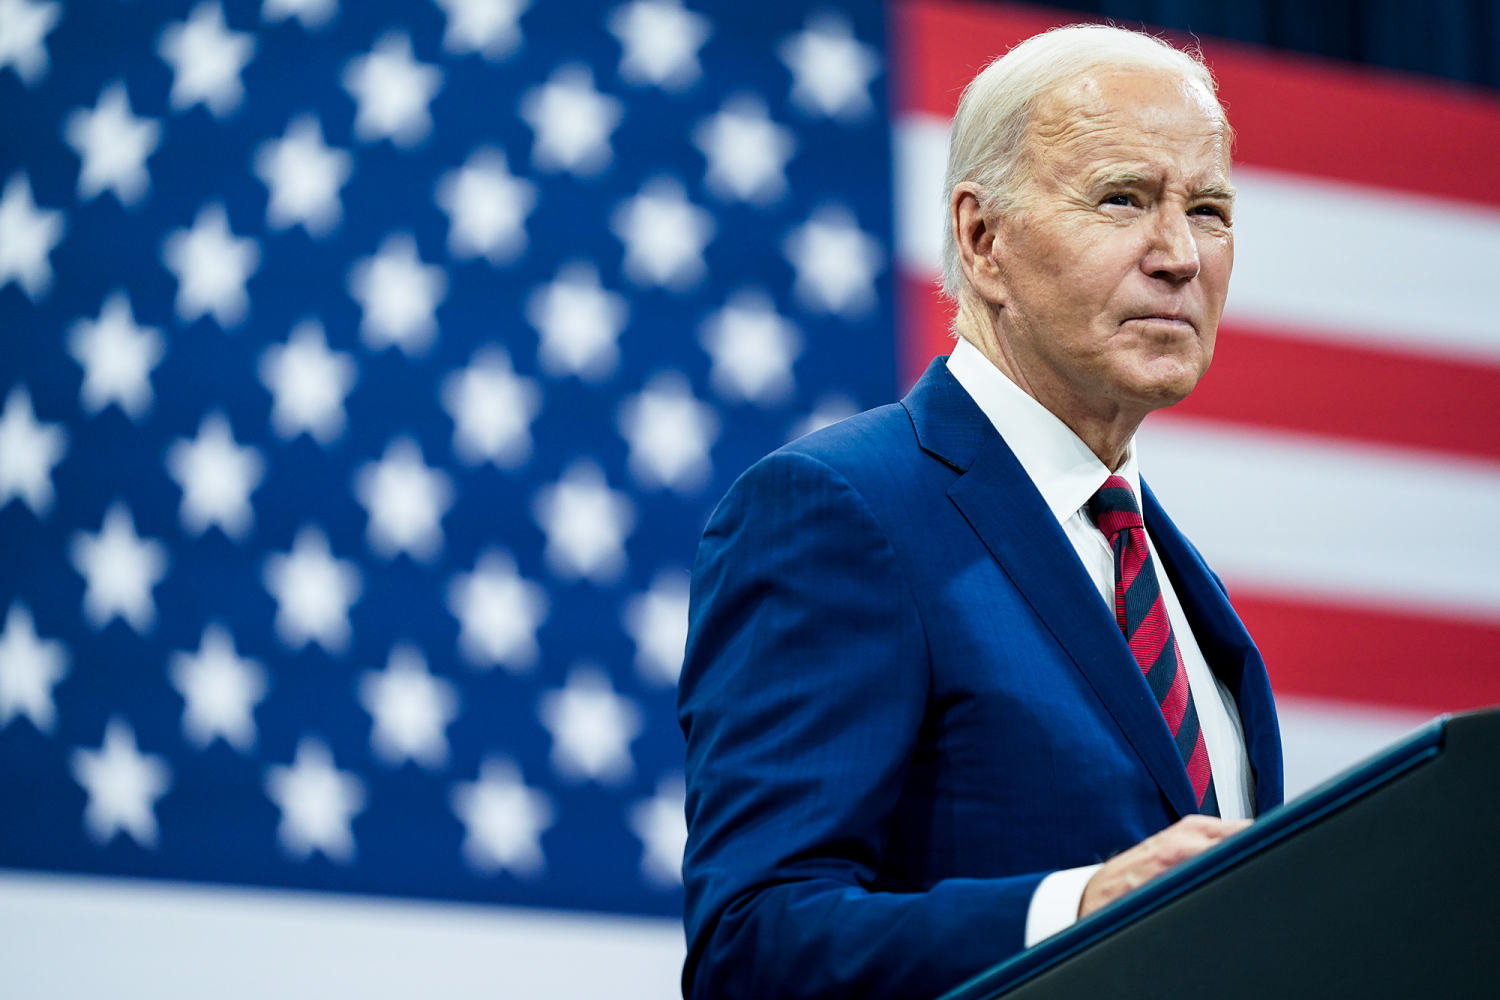 Biden is caught in a no-win situation on Israel: From the Politics Desk